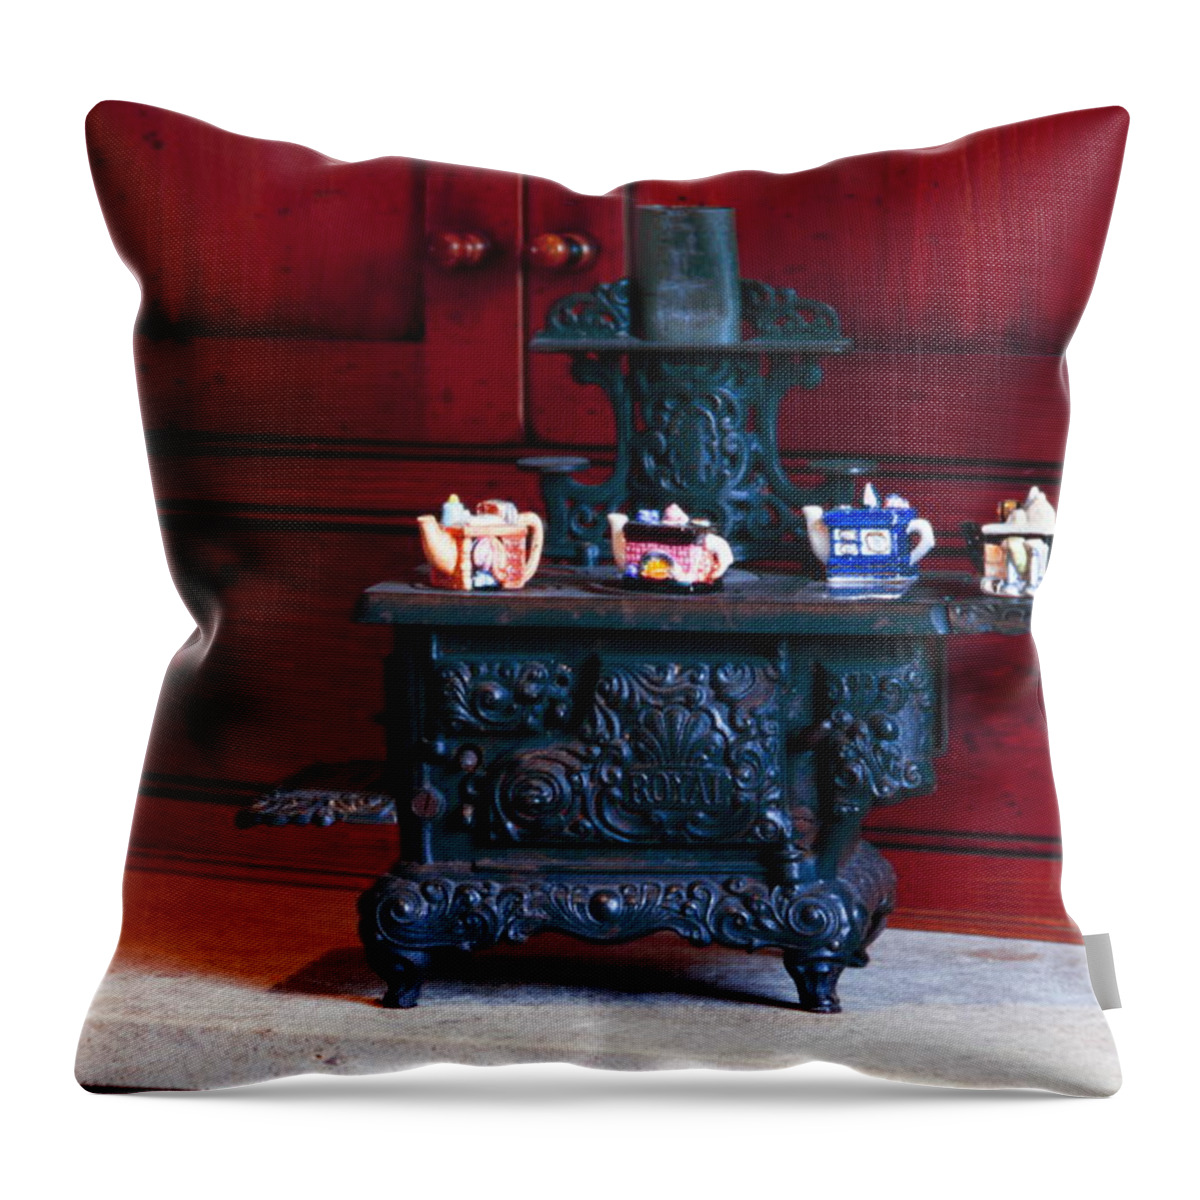 Miniature Cast Iron Stove Throw Pillow featuring the photograph Cast Iron Stove with Teapots by Sally Weigand